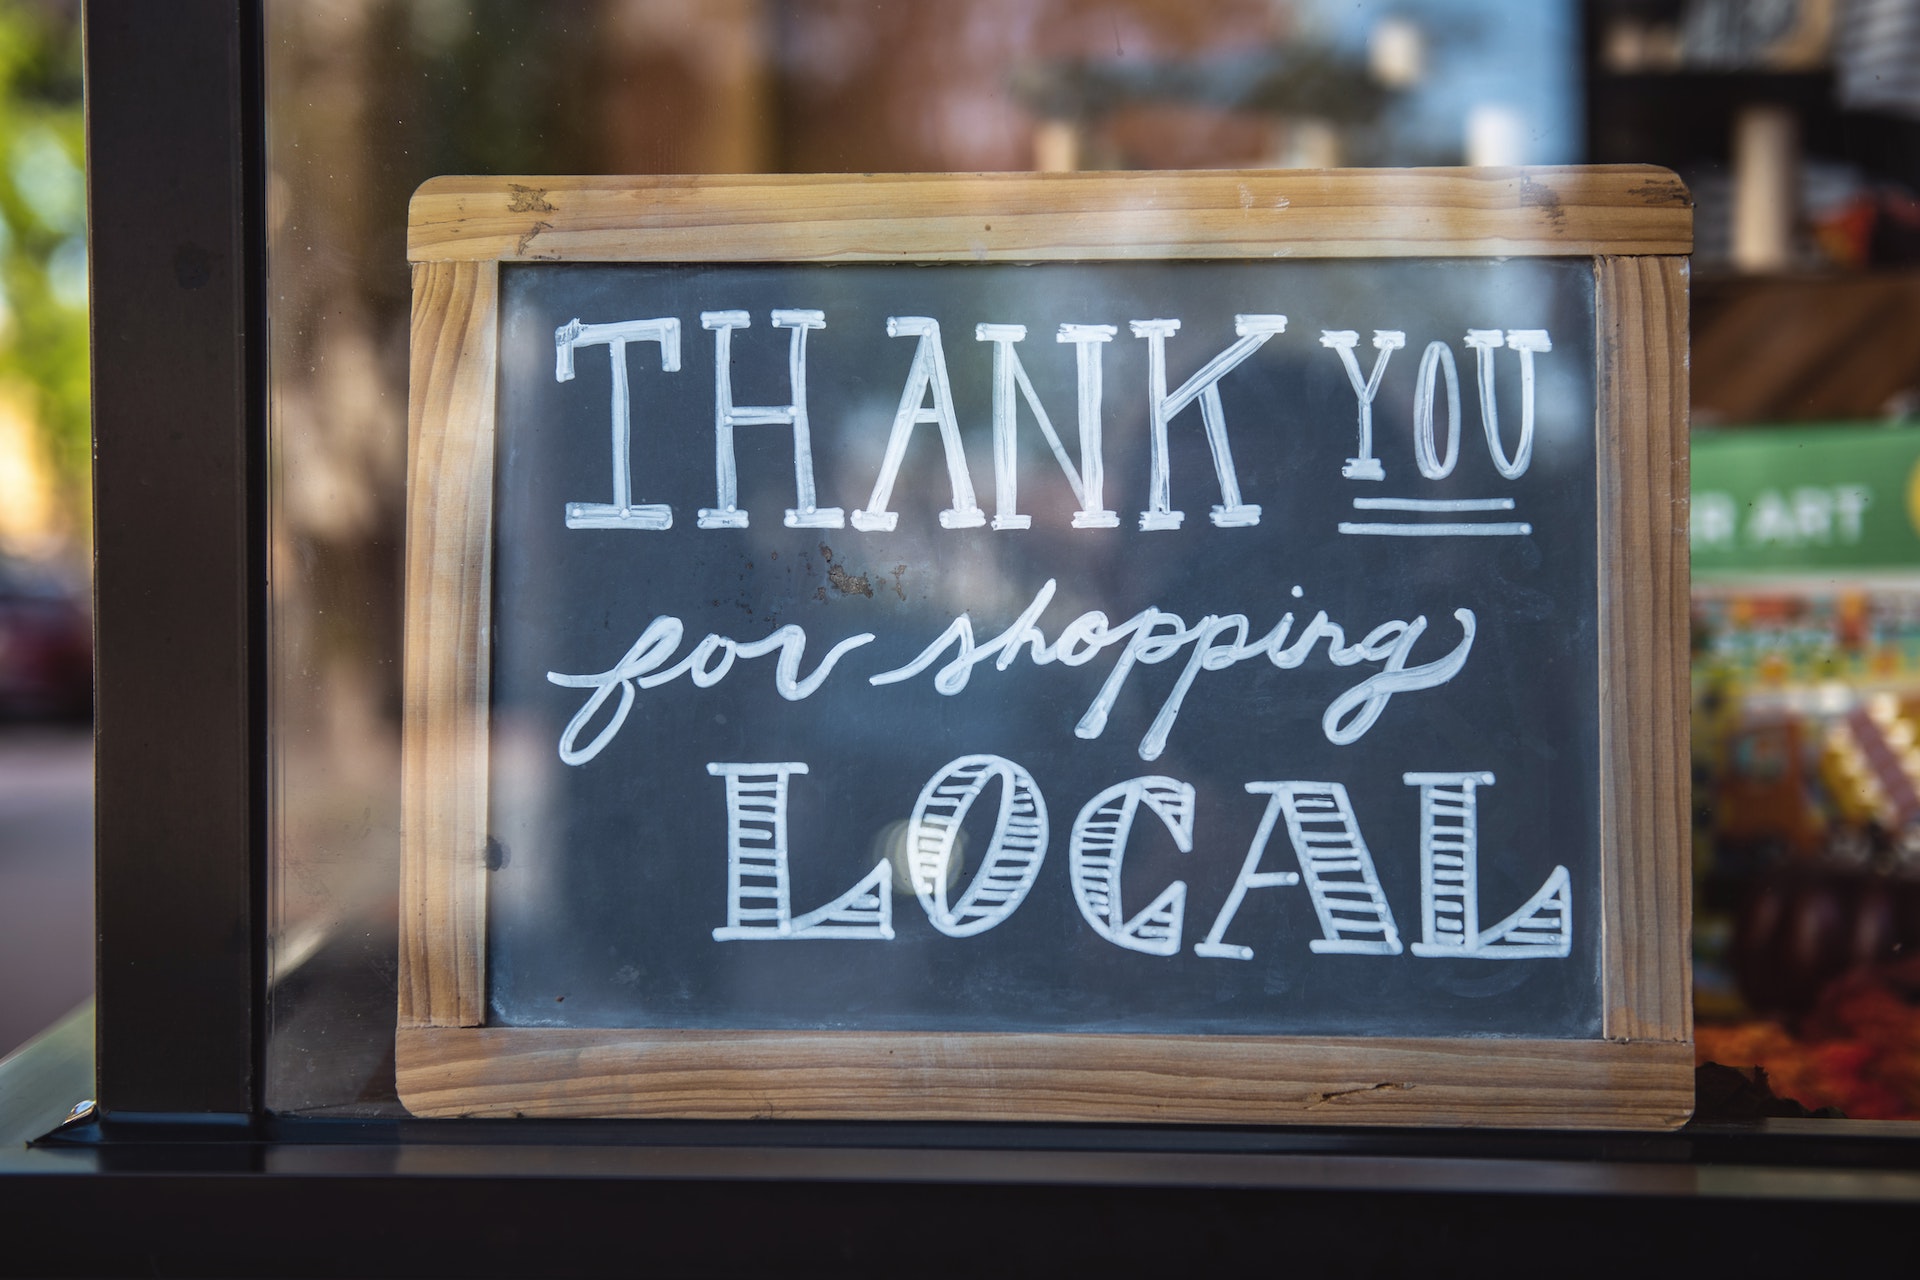 thank you sign for shopping locally